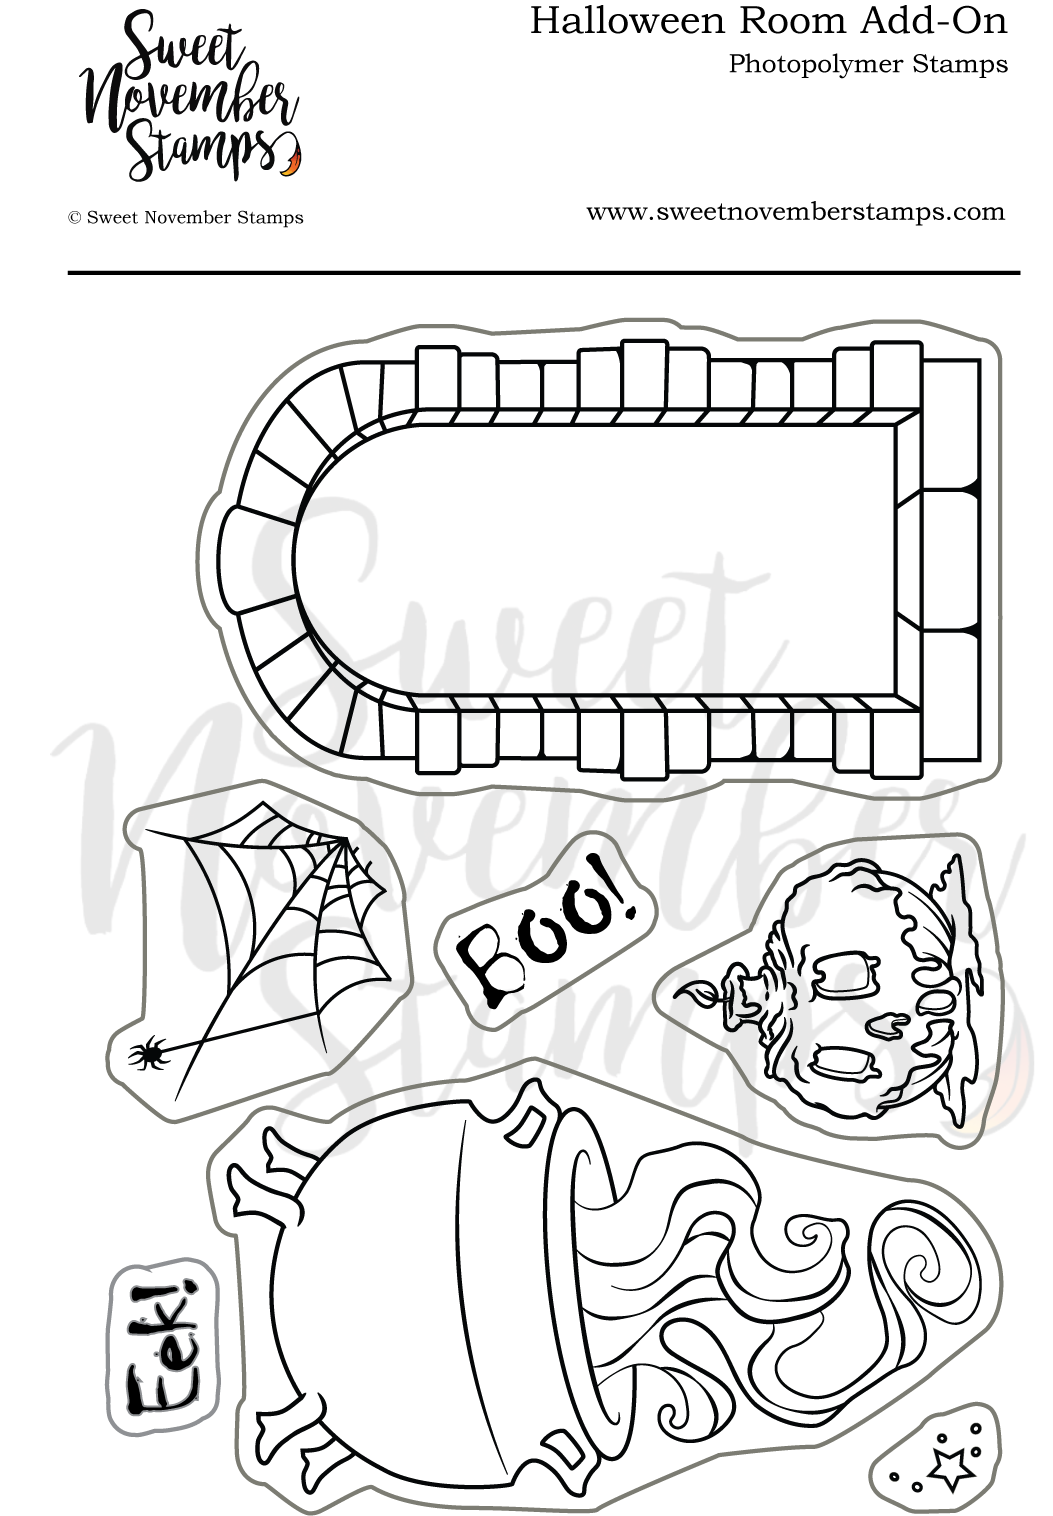 Clear Stamp Set - Halloween Room Add-on